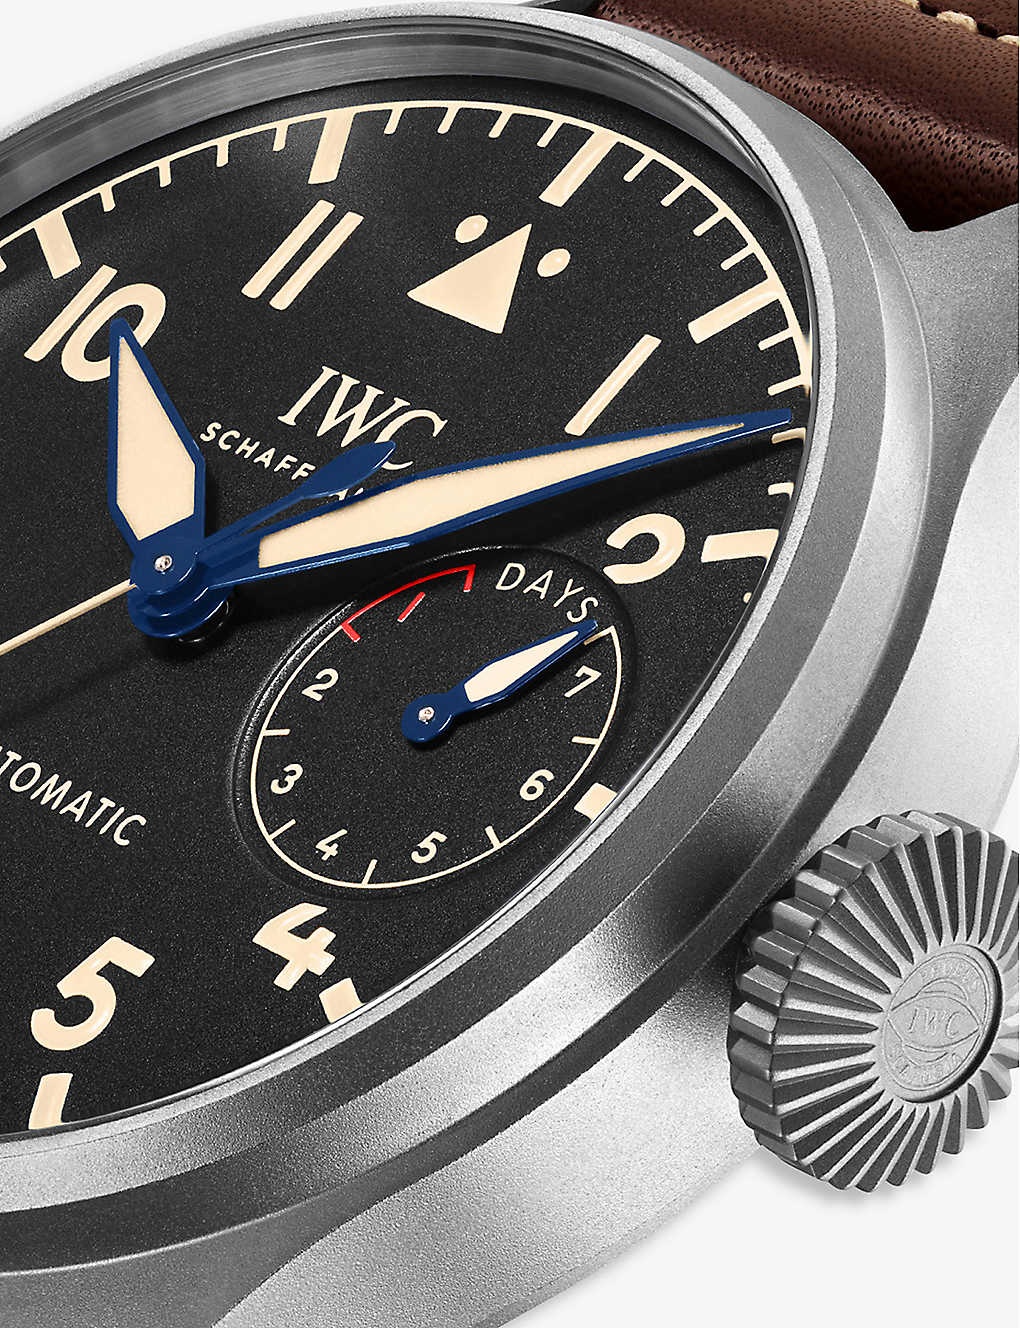 IW501004 Big Pilot's titanium and leather automatic watch - 2